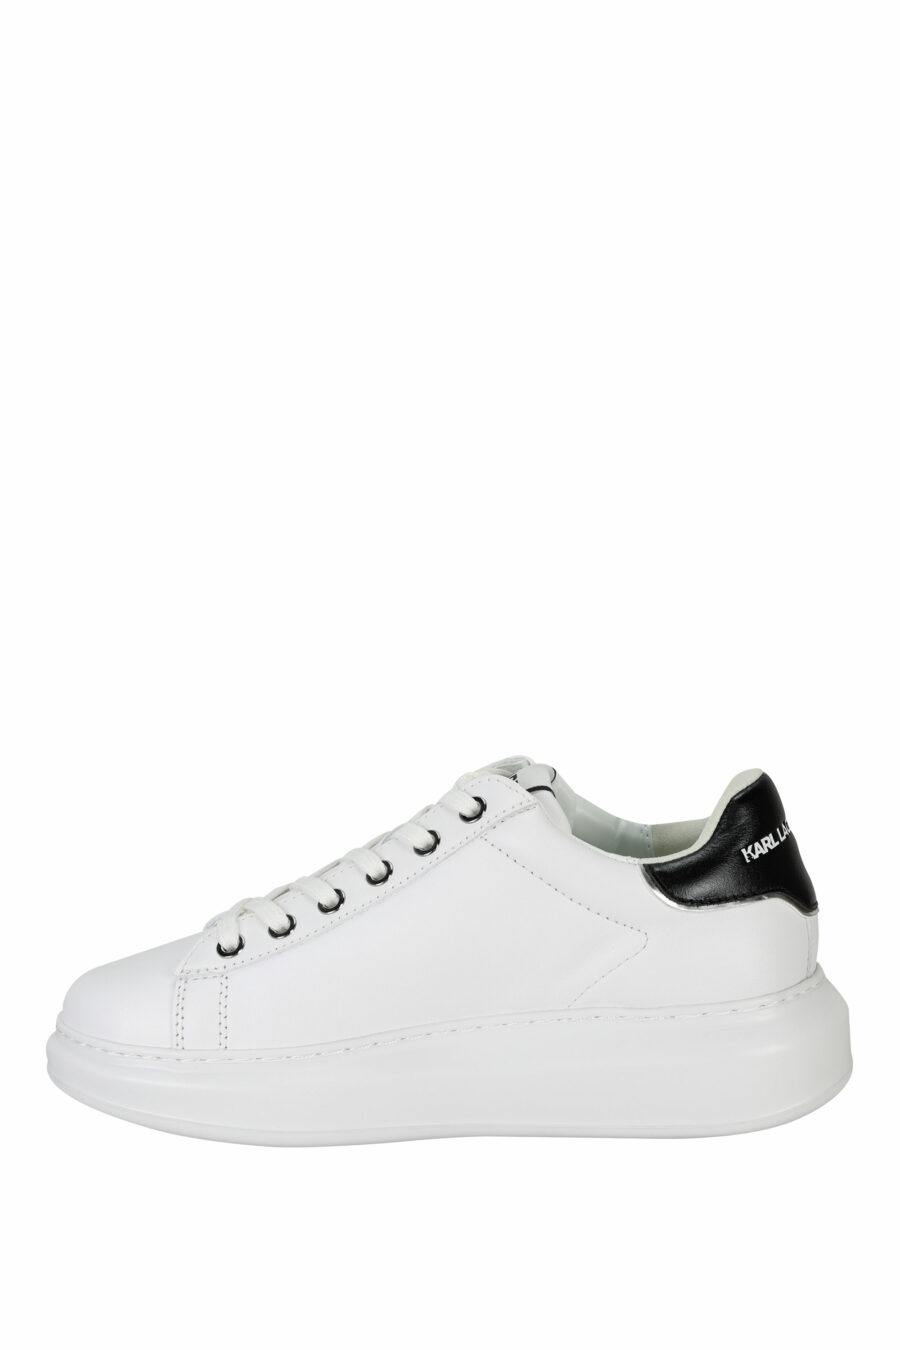 White "Kapri" trainers with rubber logo and black detail - 5059529351020 2